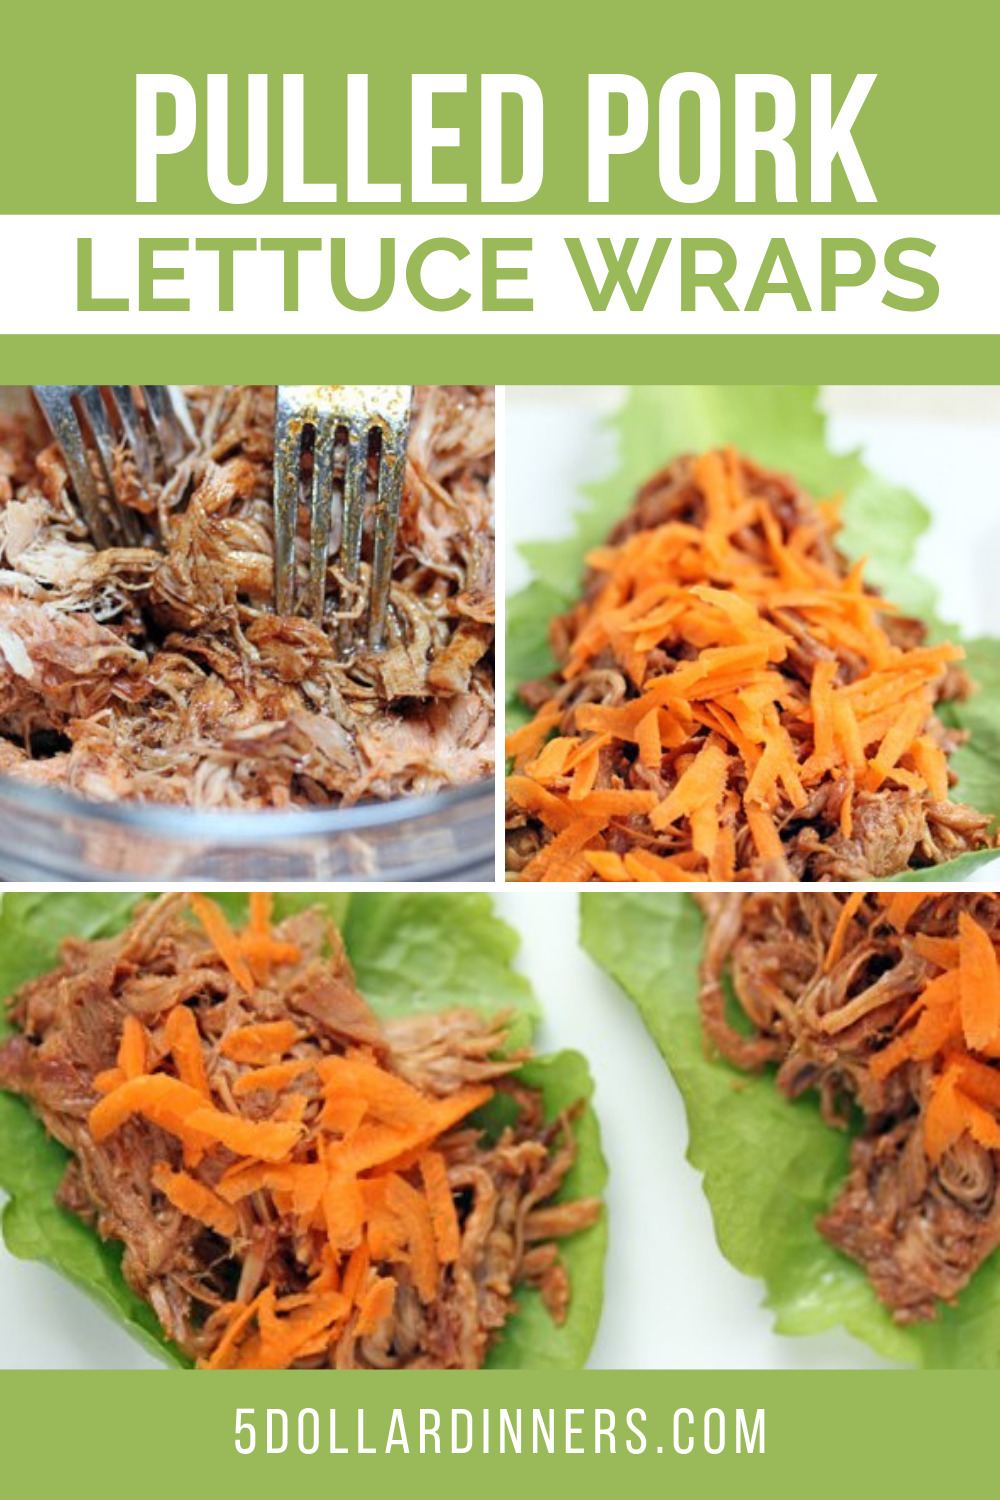 Pulled Pork in Lettuce Wraps - Fresh, delicious, summer meal idea!